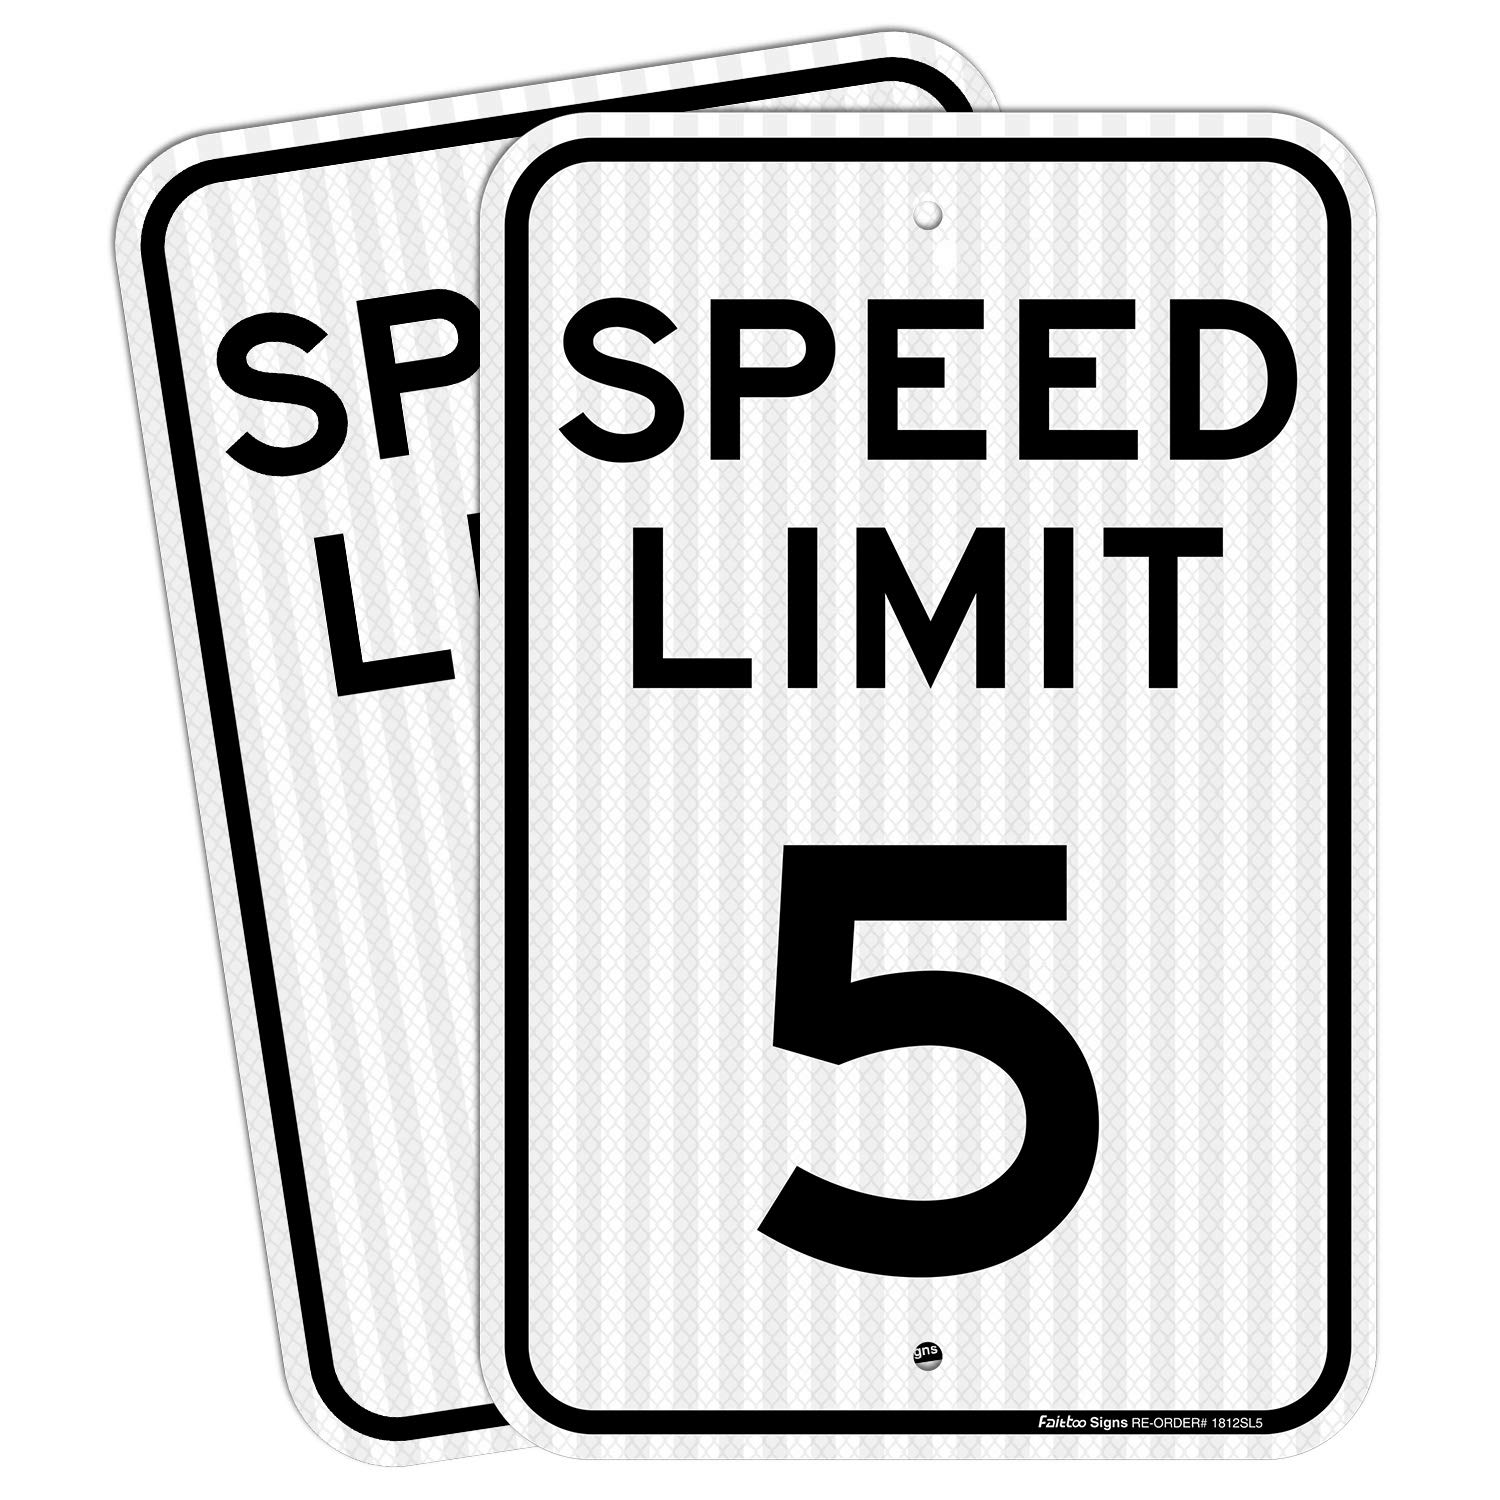 (2 Pack) Speed Limit 5 MPH Sign, 18 x 12 Inches Engineer Grade Reflective Sheeting, Rust Free Aluminum, Weather Resistant, Waterproof, Durable Ink, Easy to Mount